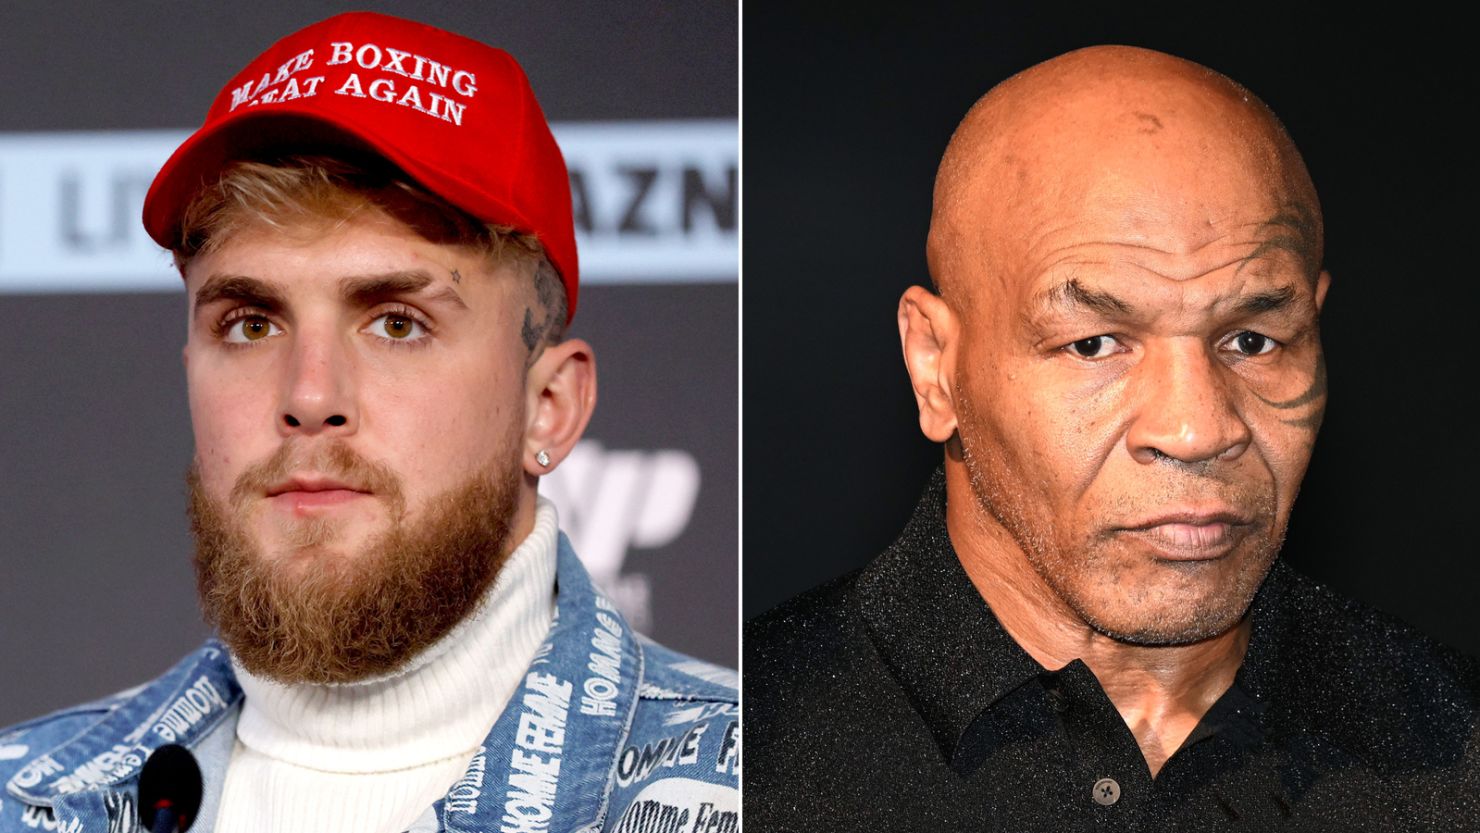 Jake Paul and Mike Tyson are set to meet in the boxing ring for an exhibition fight in July at the Dallas Cowboys' AT&T Stadium.